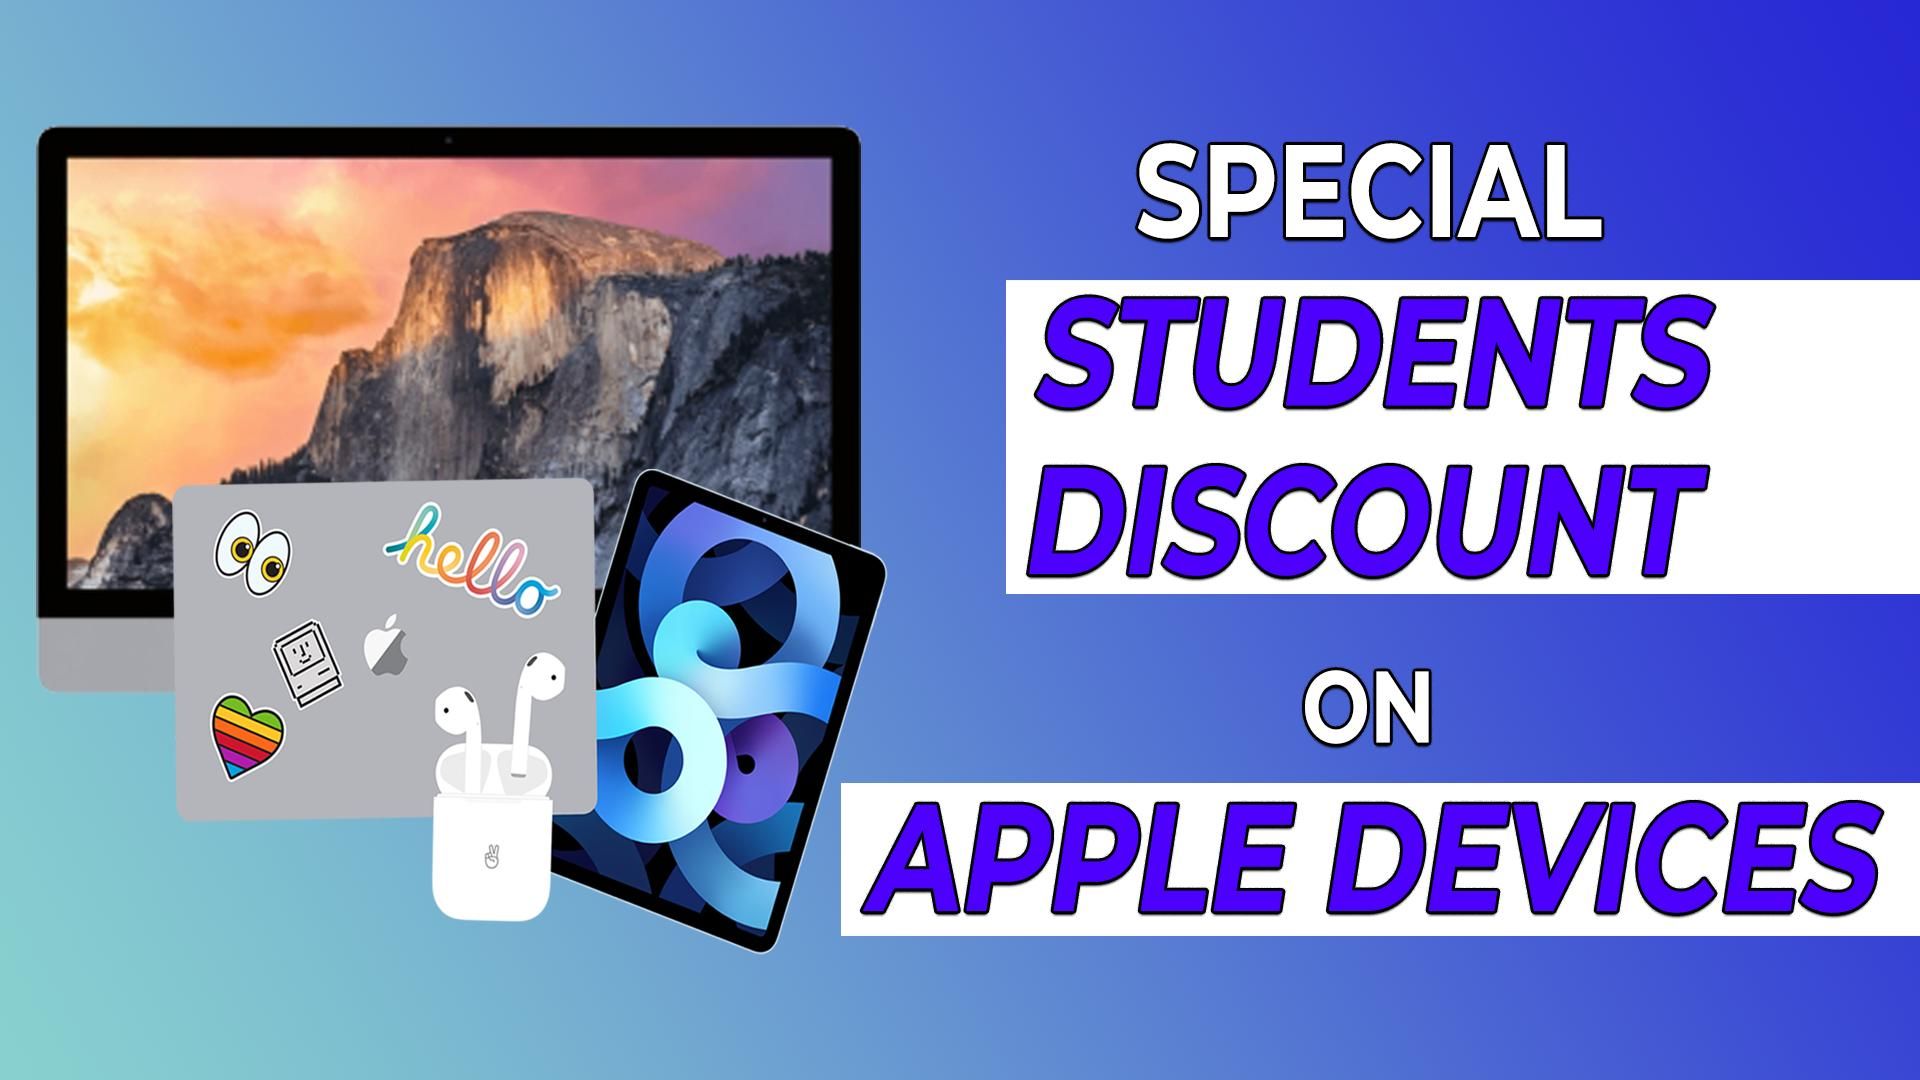 apples-back-to-school-offer-comes-up-with-special-student-discounts-on